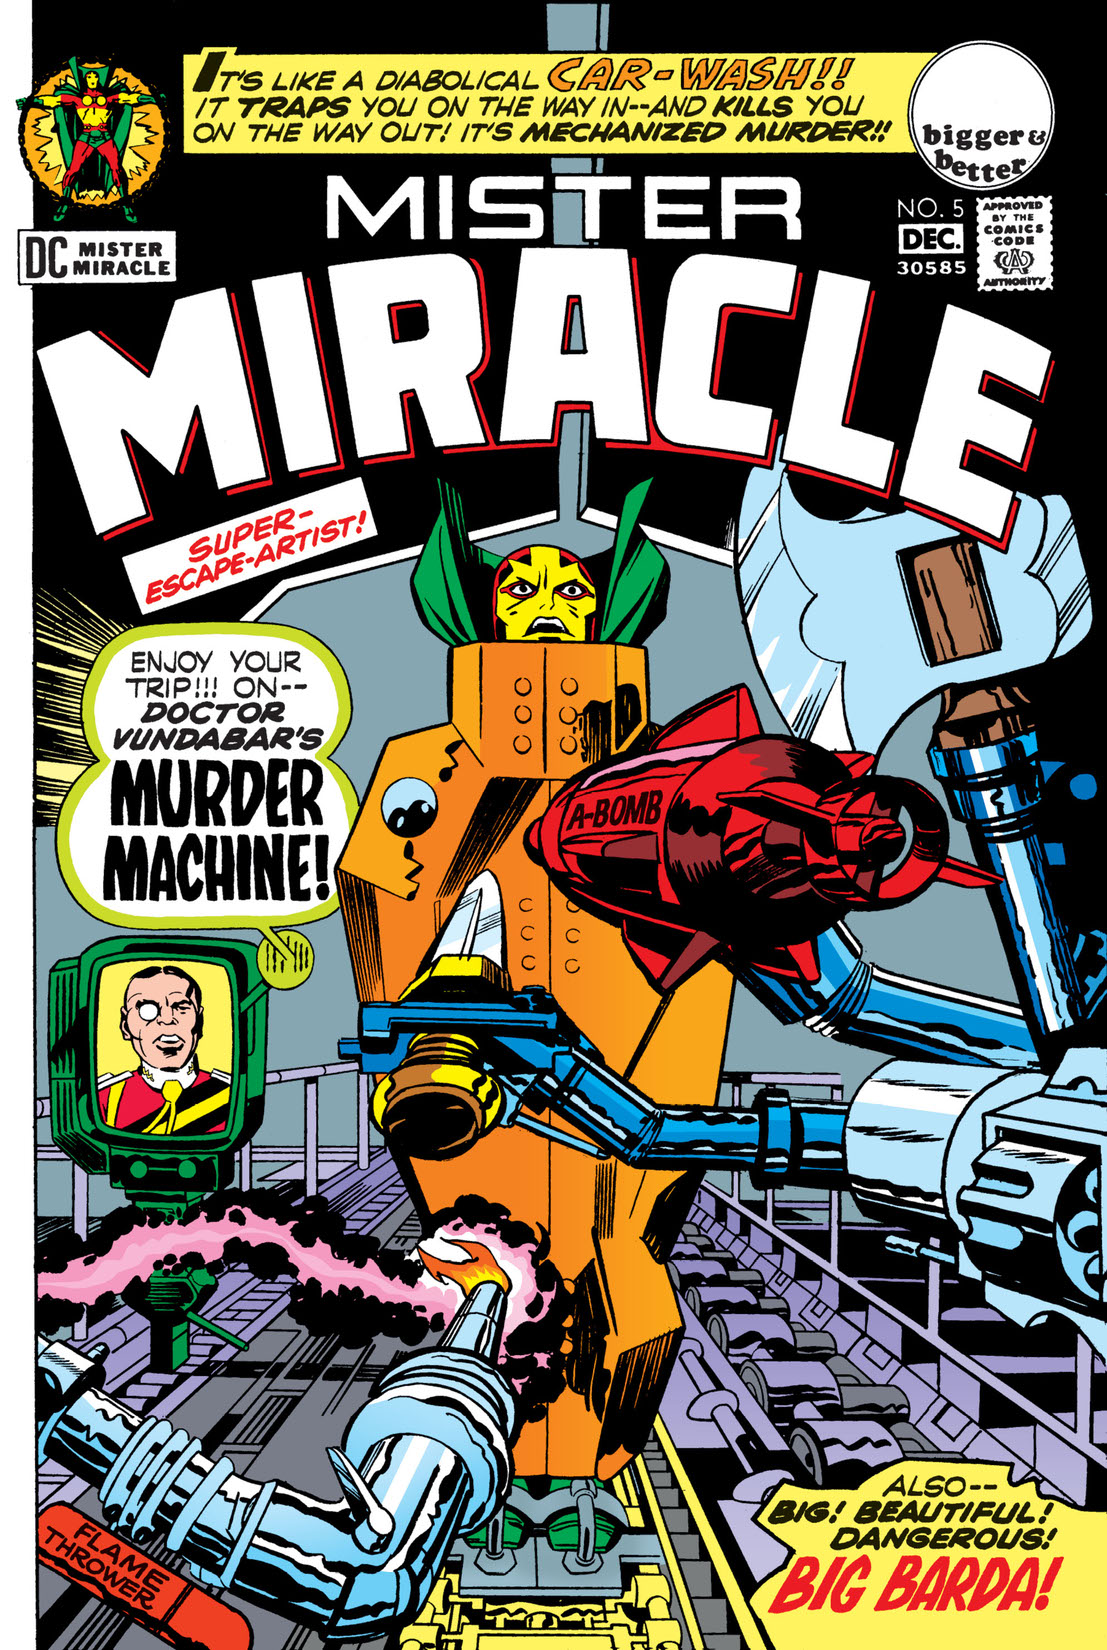 Mister Miracle (1971-) #5 preview images